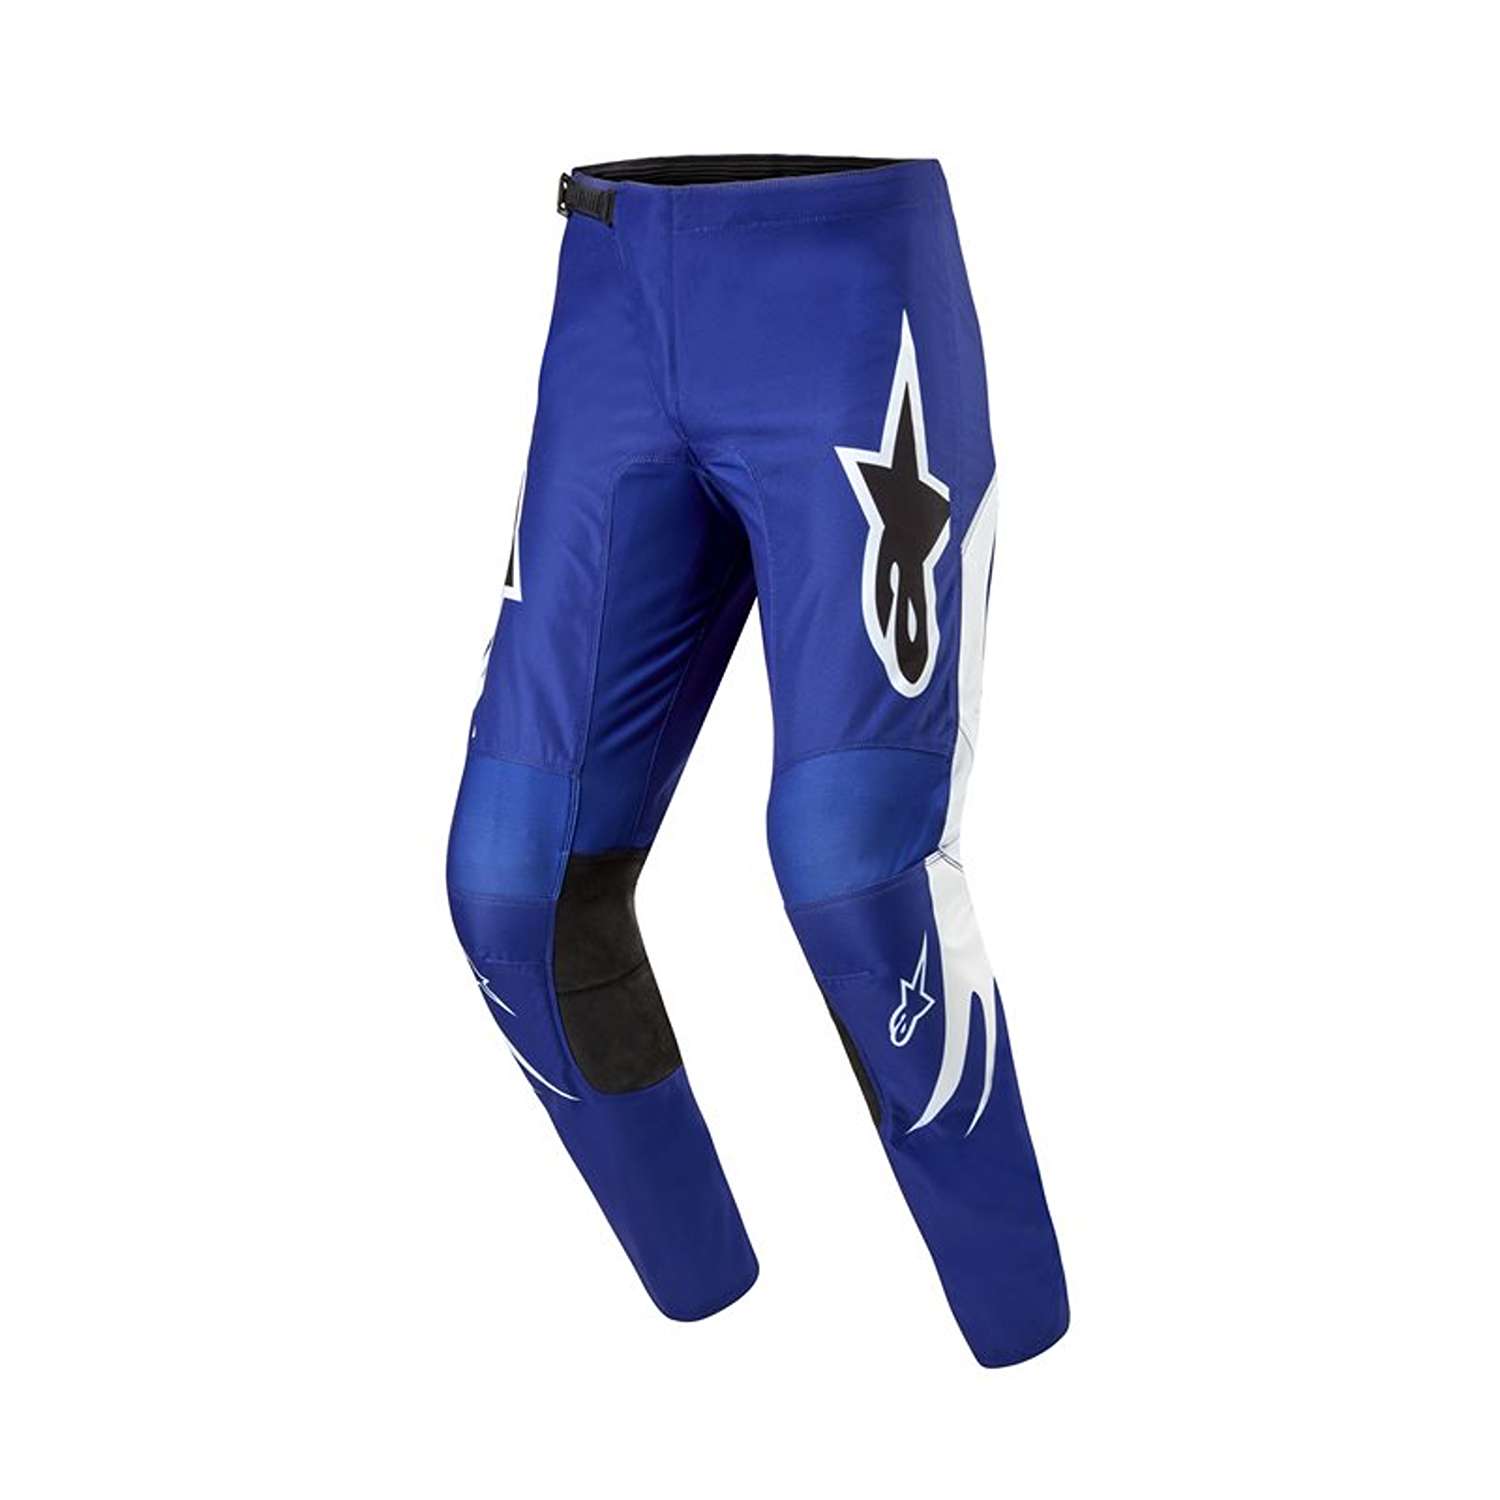 Image of EU Alpinestars Fluid Lucent Pants Blue Ray White Taille 34